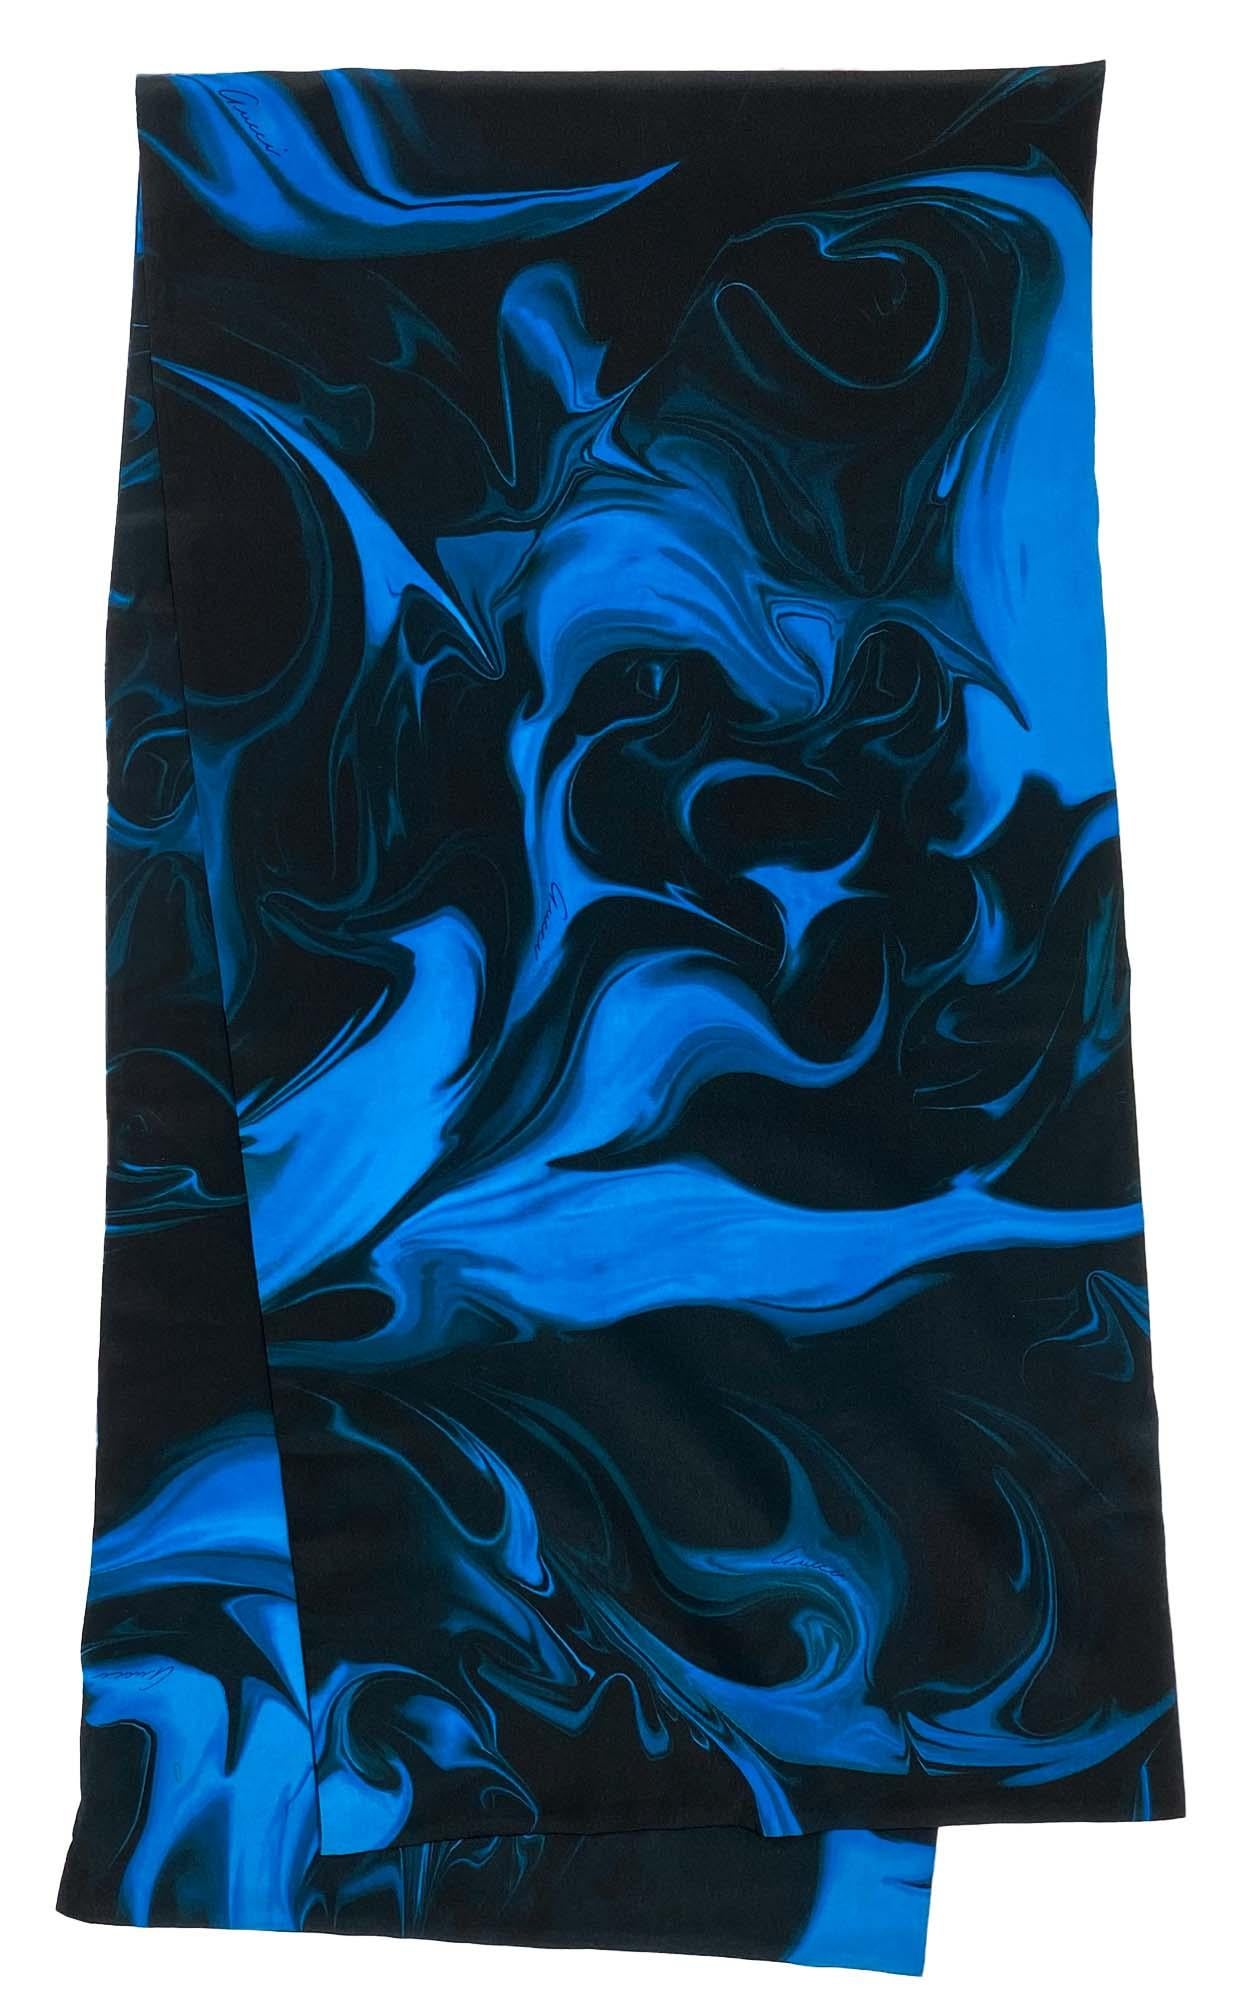 TheRealList presents: a rare blue lava print Gucci scarf, designed by Tom Ford. The lava design was debuted on the men's Spring/Summer 2001 runway and was used heavily in womenswear. This print was quite popular and a shirt in this pattern was even